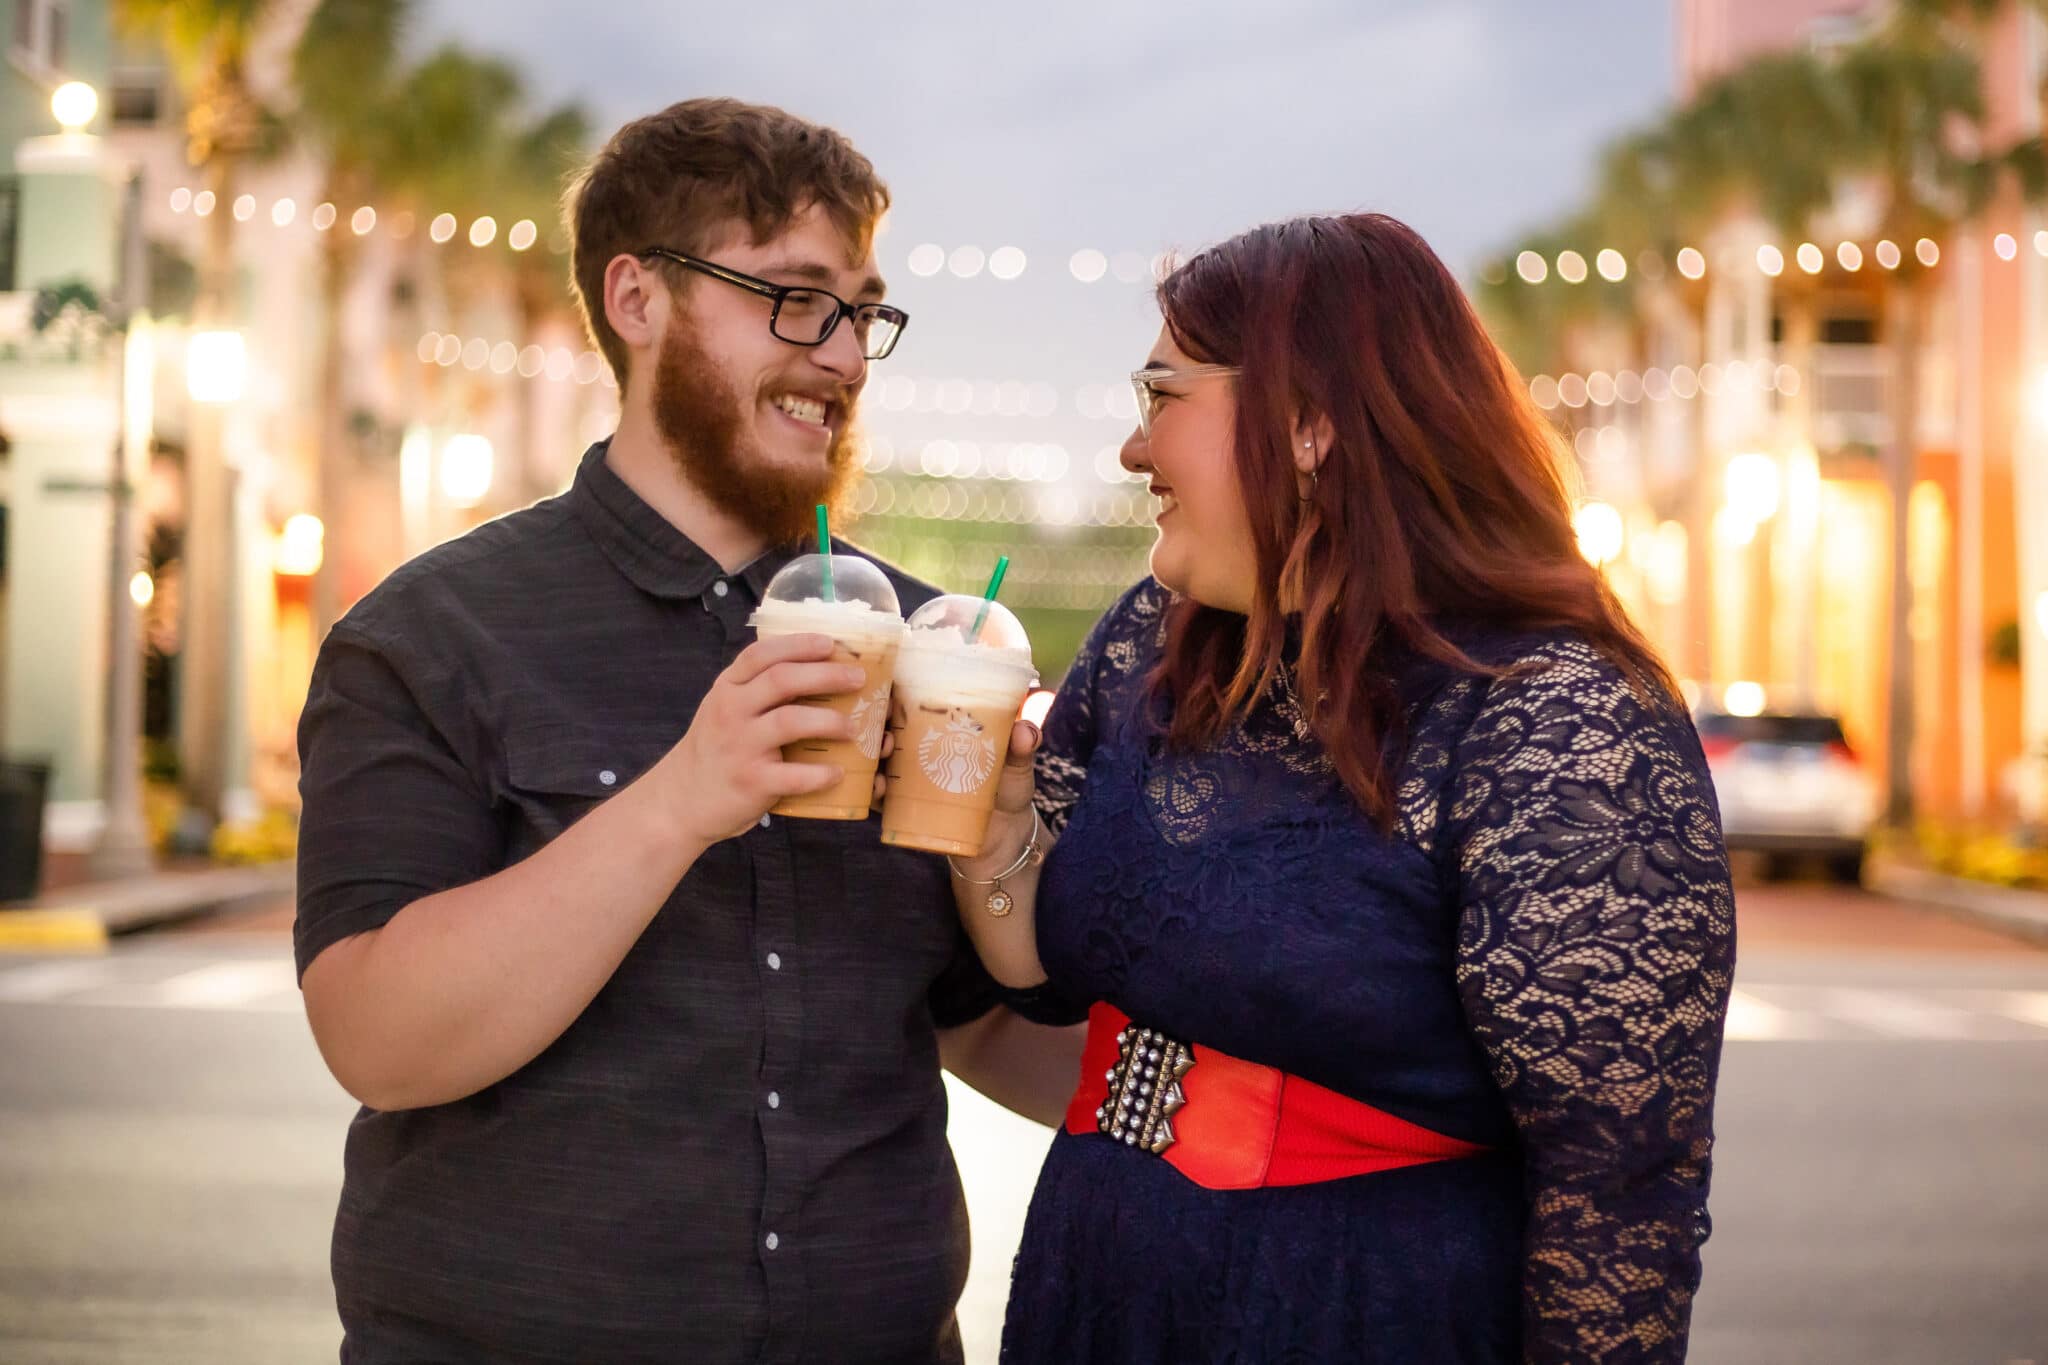 Man and woman carrying Starbucks and smiling at each other